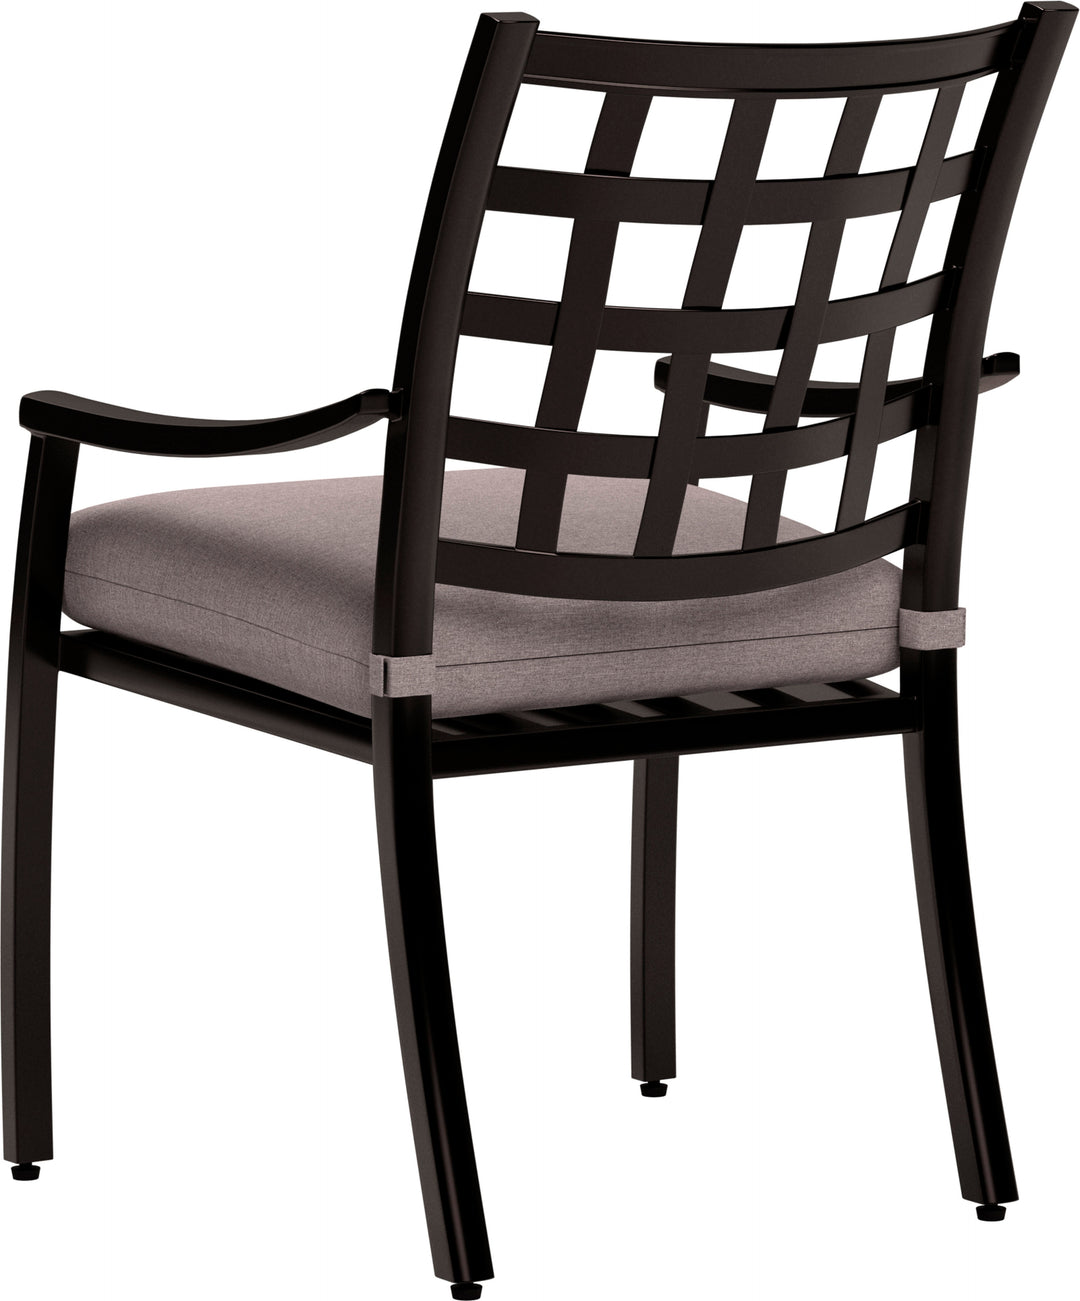 Yardbird® - Lily Outdoor Dining Arm Chair - Shale_3